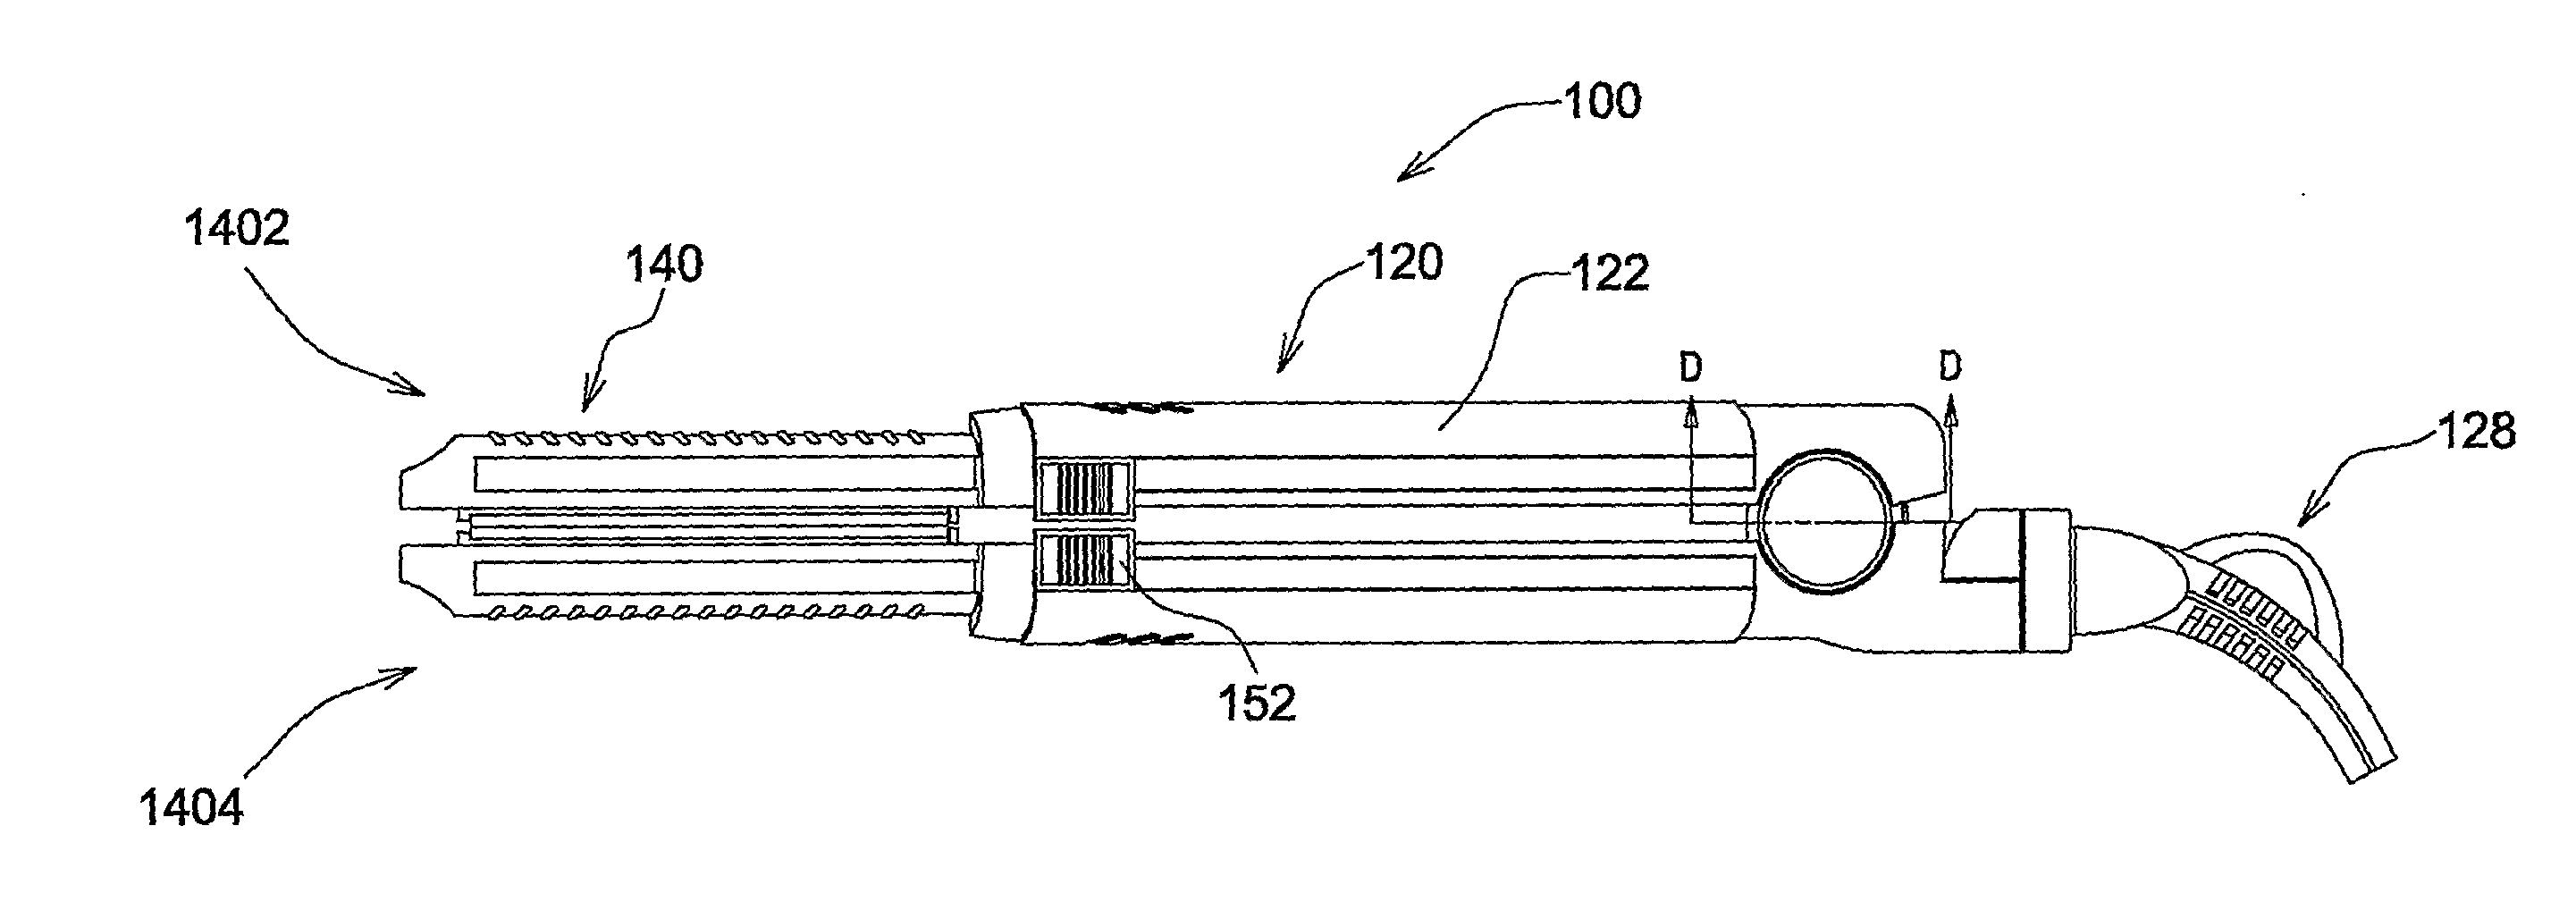 Hair styling apparatus with retractable styling heads